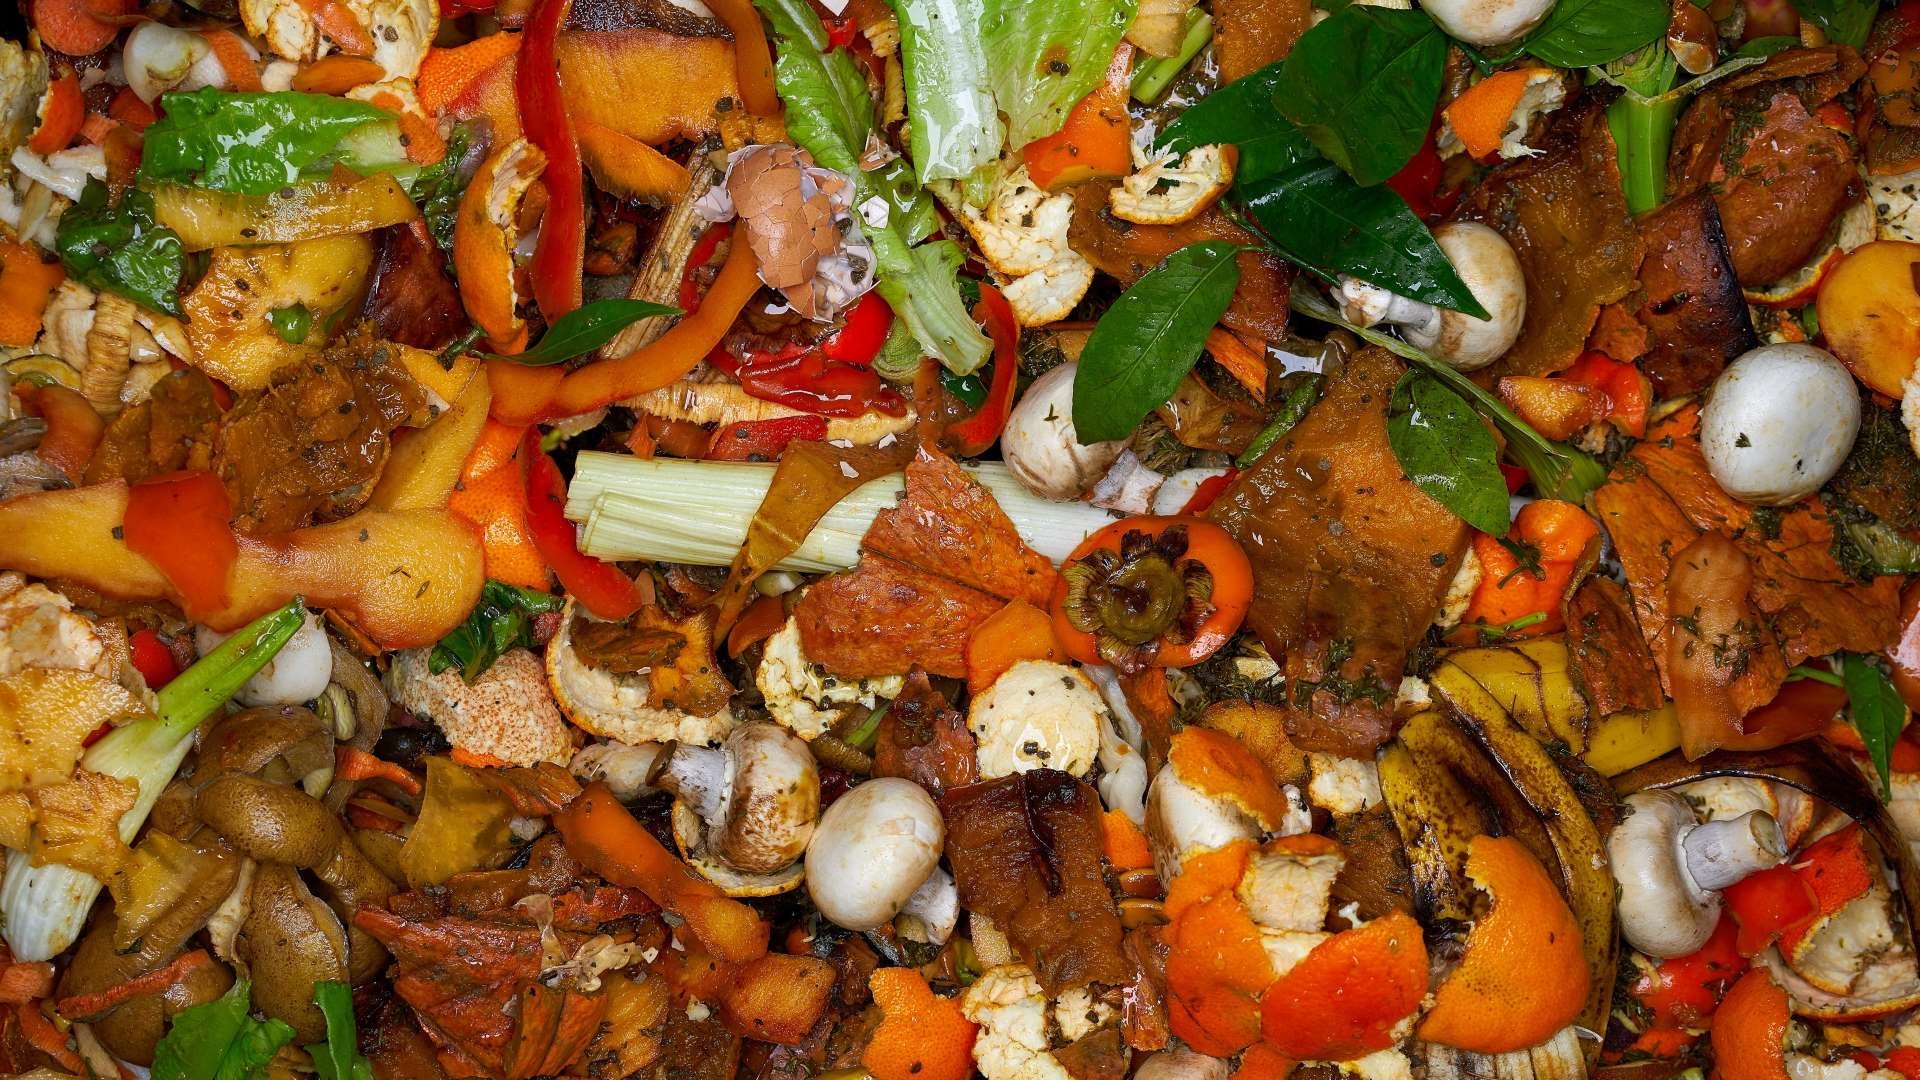 Photo shows closeup of fruit and vegetable scraps and peels.